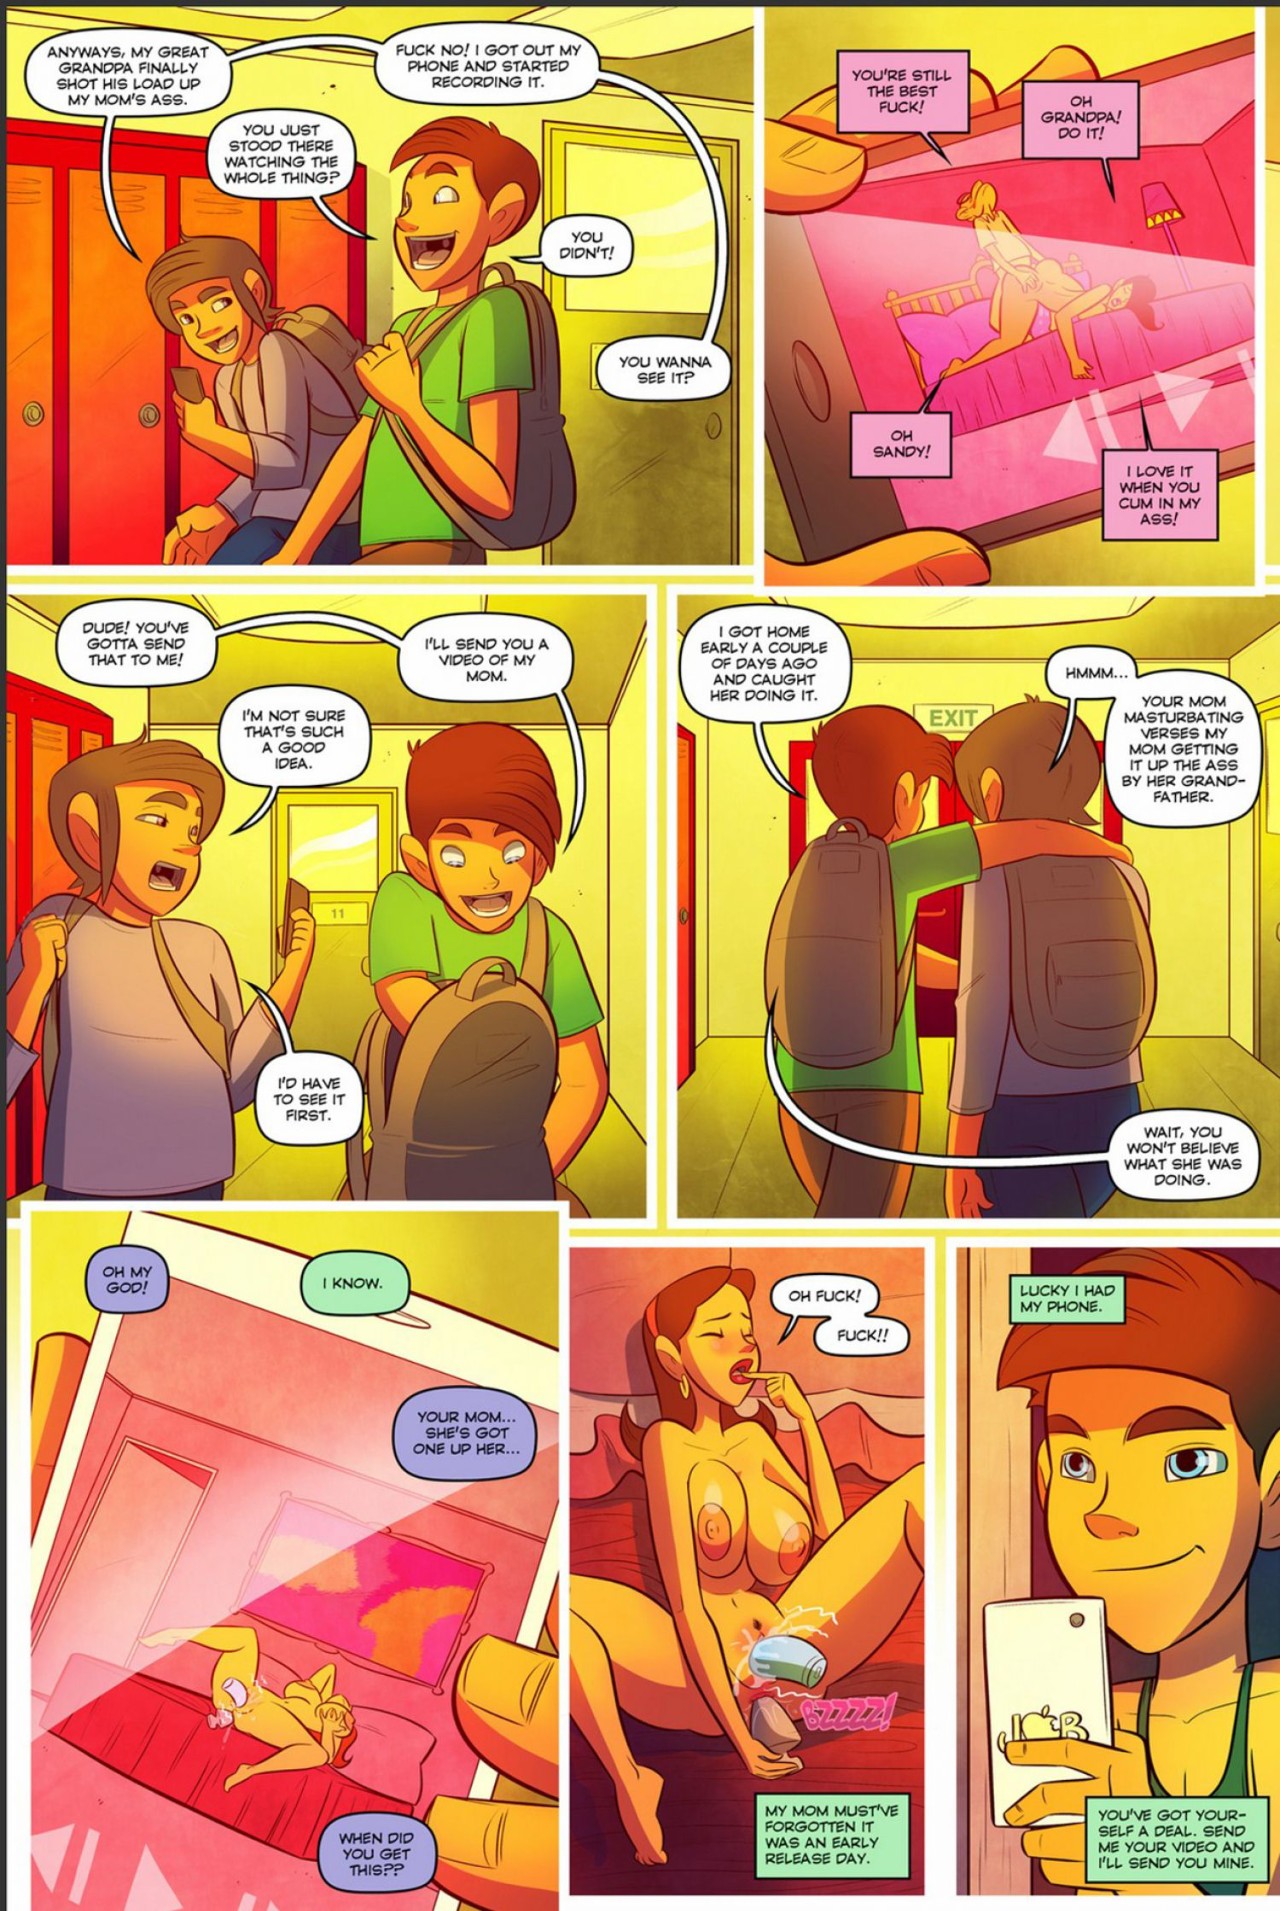 Keeping It Up With The Joneses Part 3 Porn Comic english 13